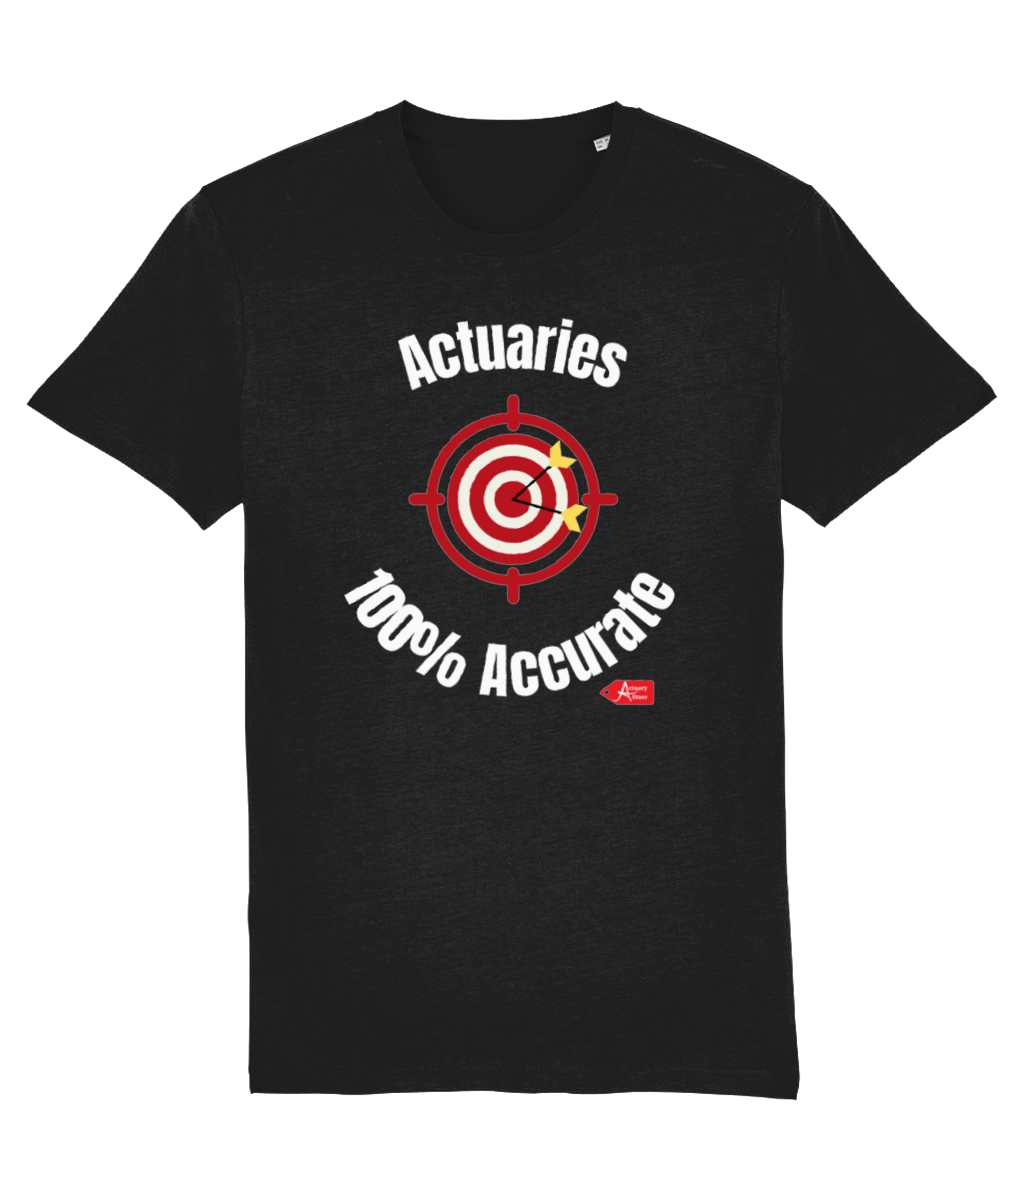 Actuaries 100% Accurate T-shirt